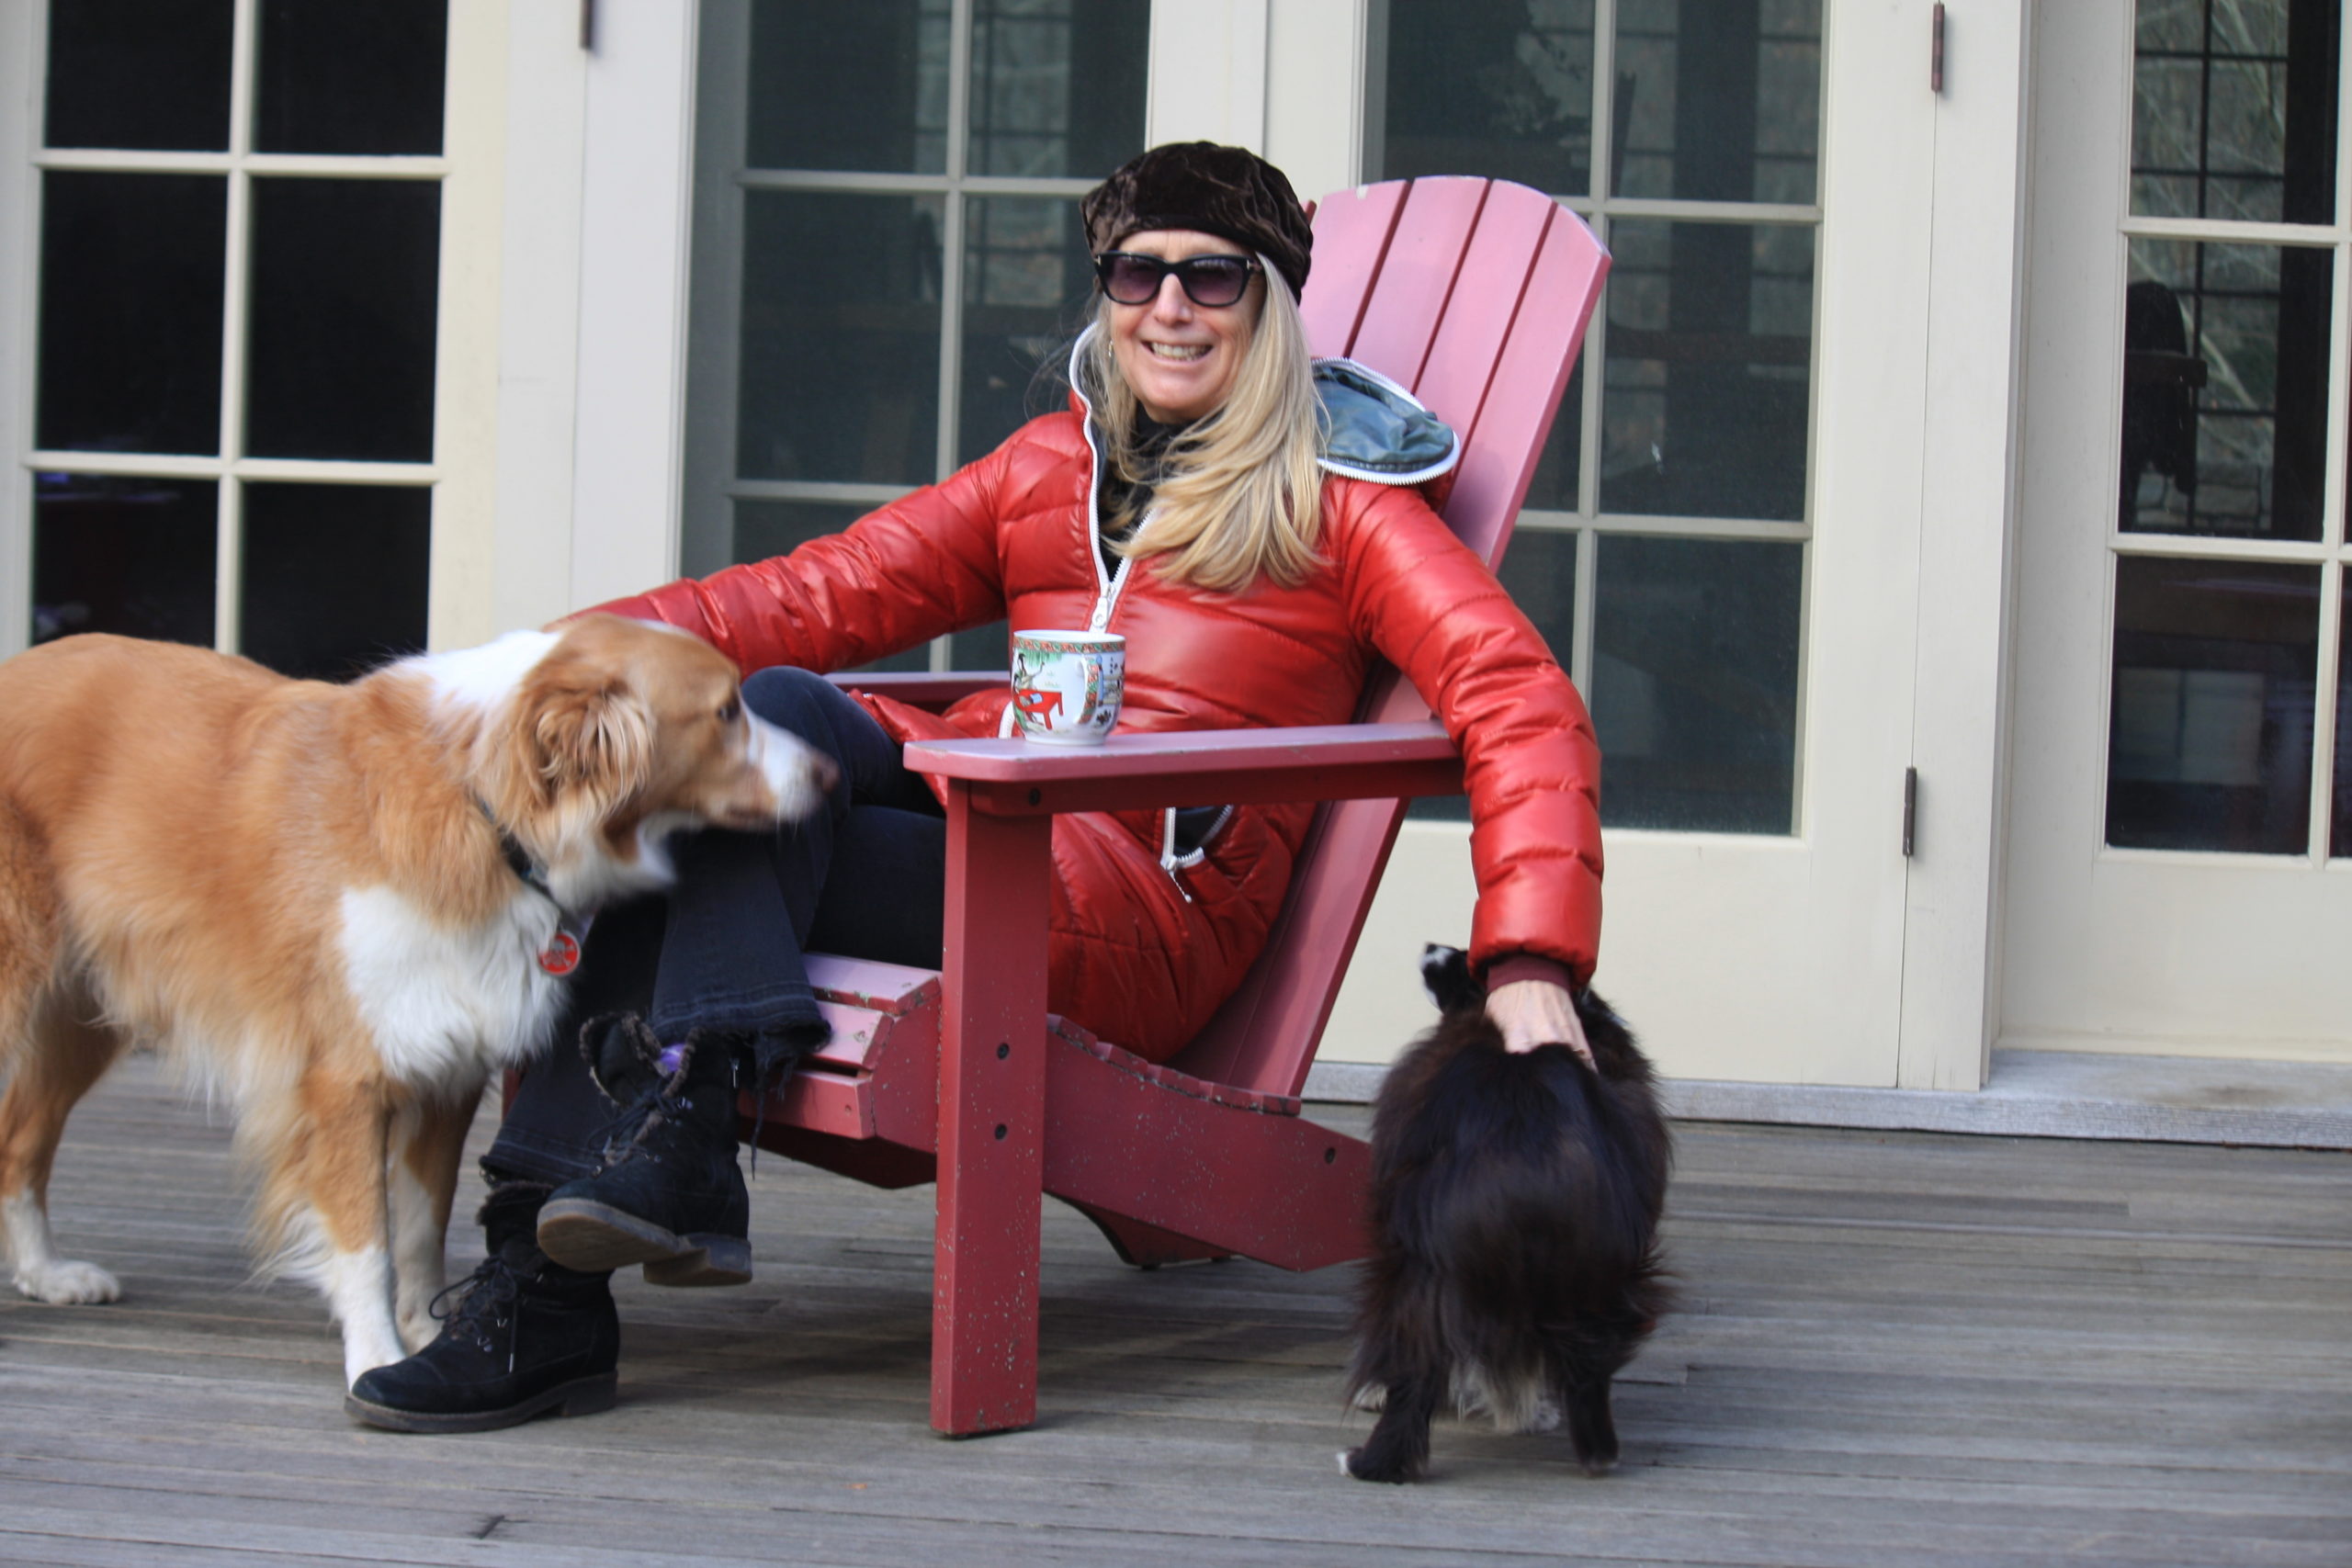 Taylor Barton at home with her dogs.